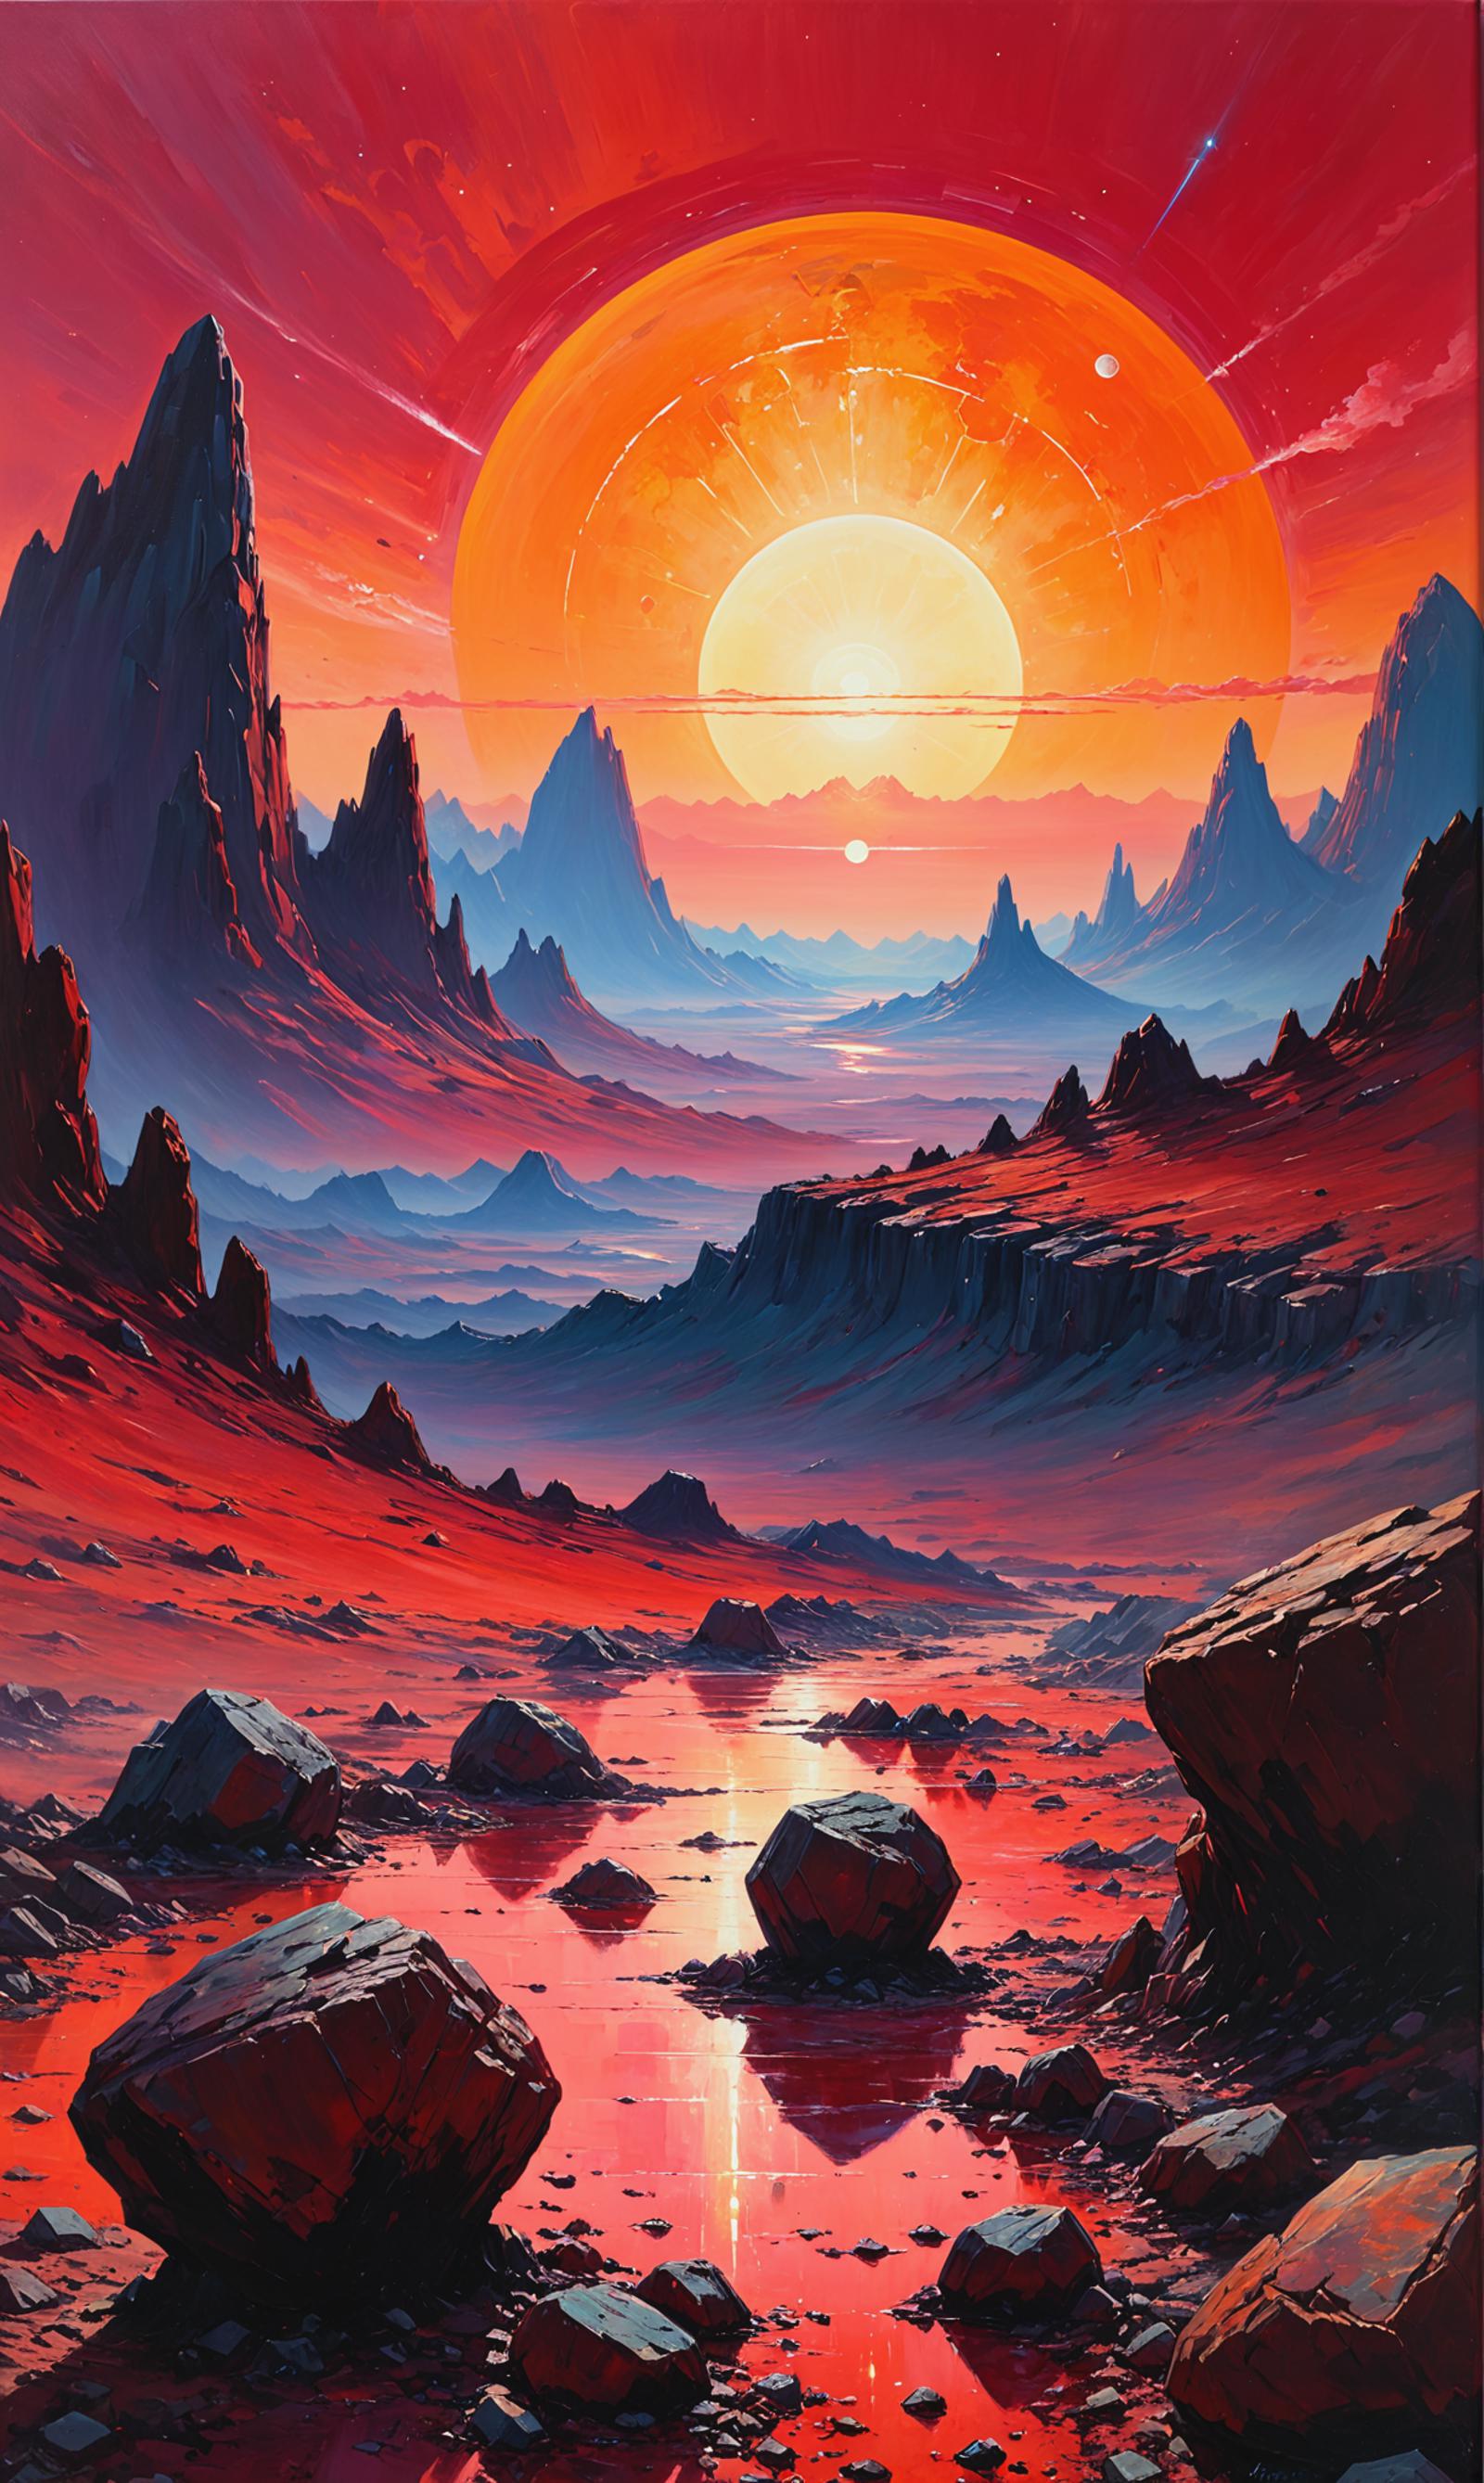 A Painted Landscape of Mountains, Sun, and Water